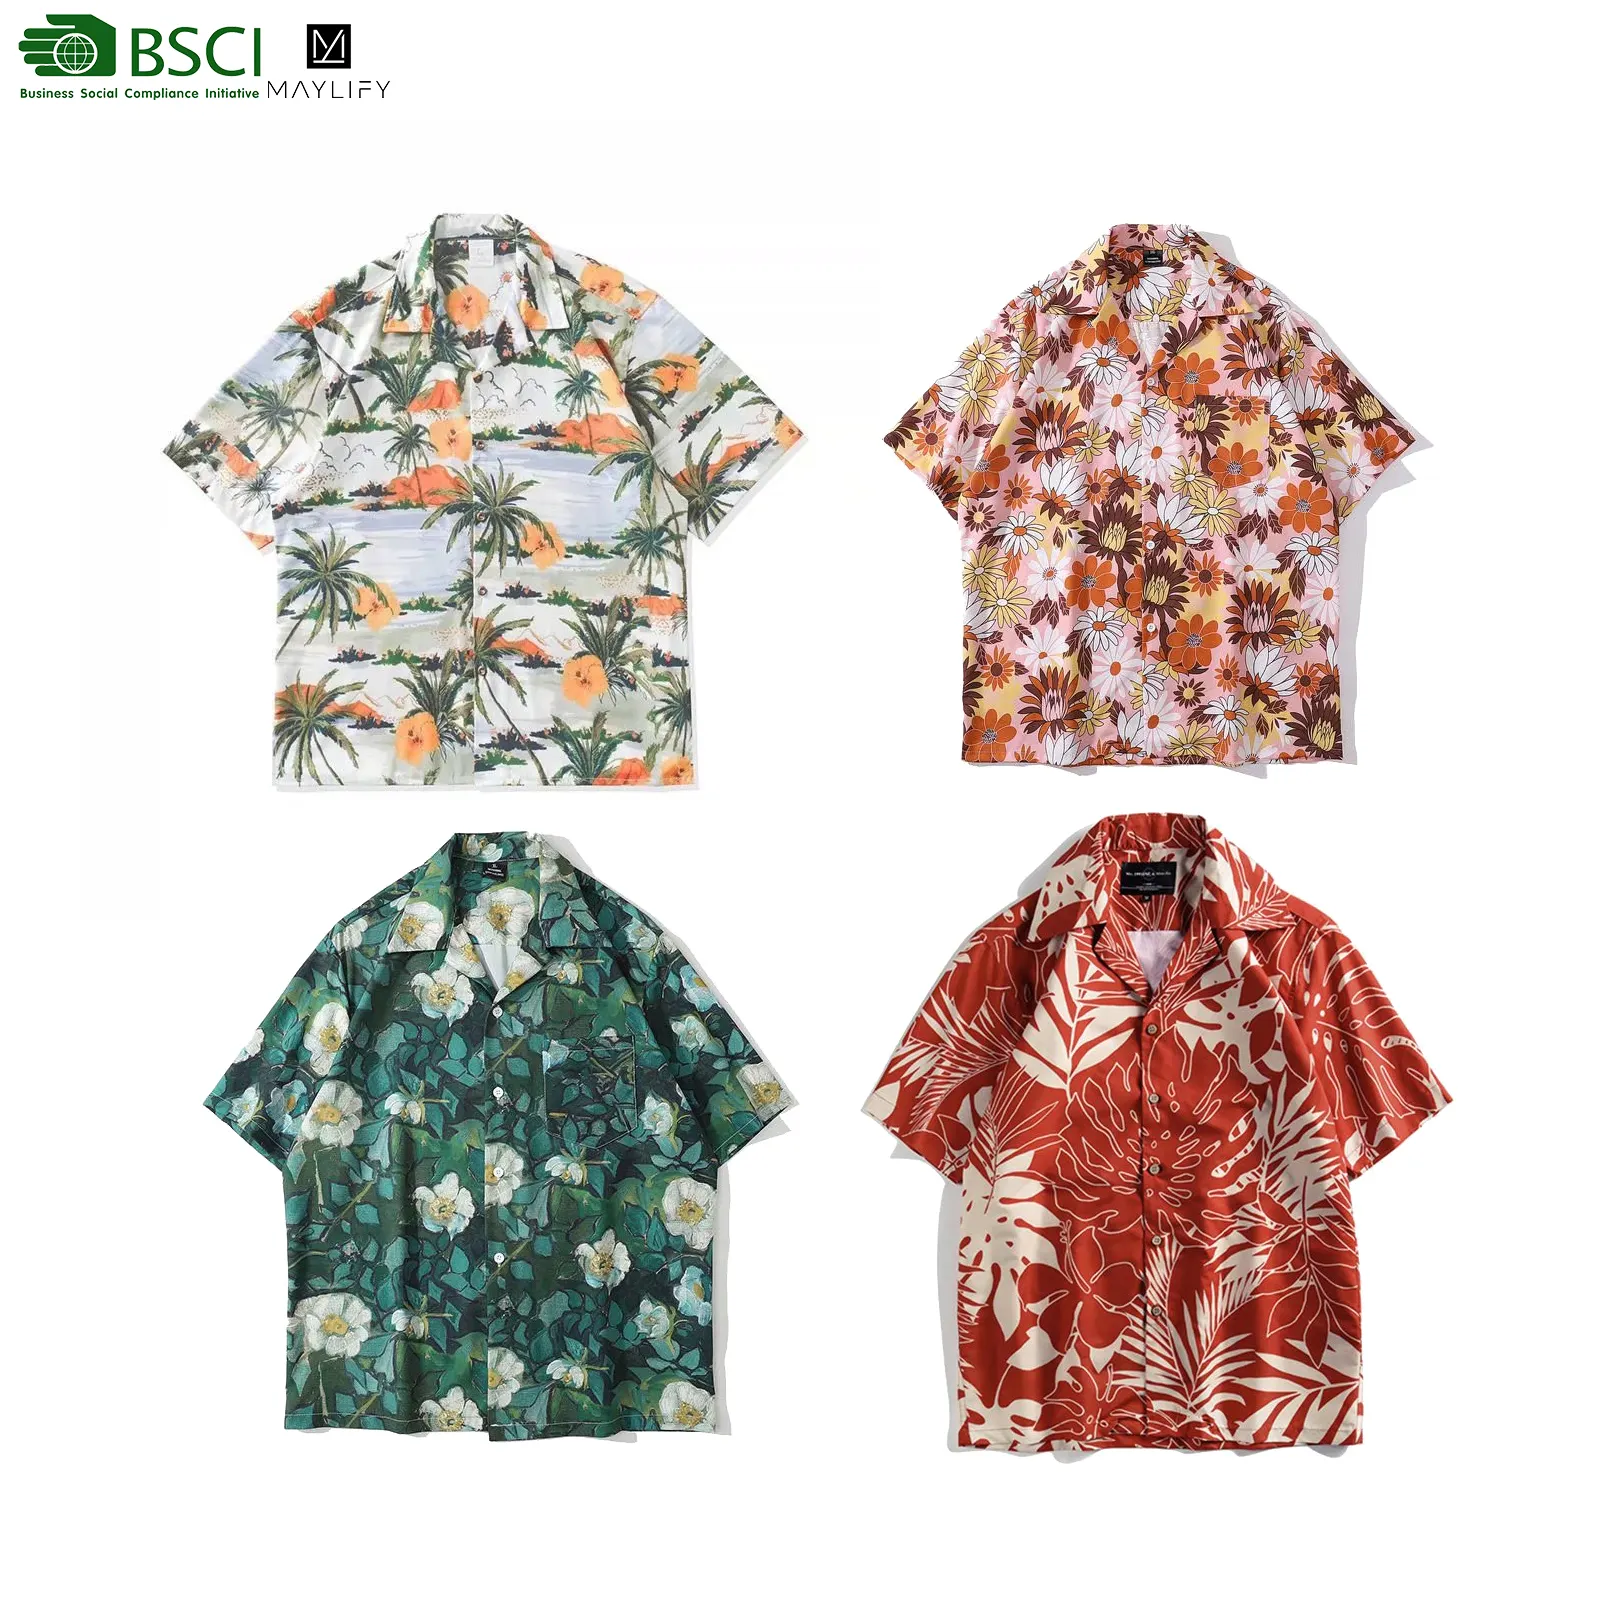 2023 Loose flower casual retro floral men's t-shirts hip hop style summer untuckit hawaiian shirts for men